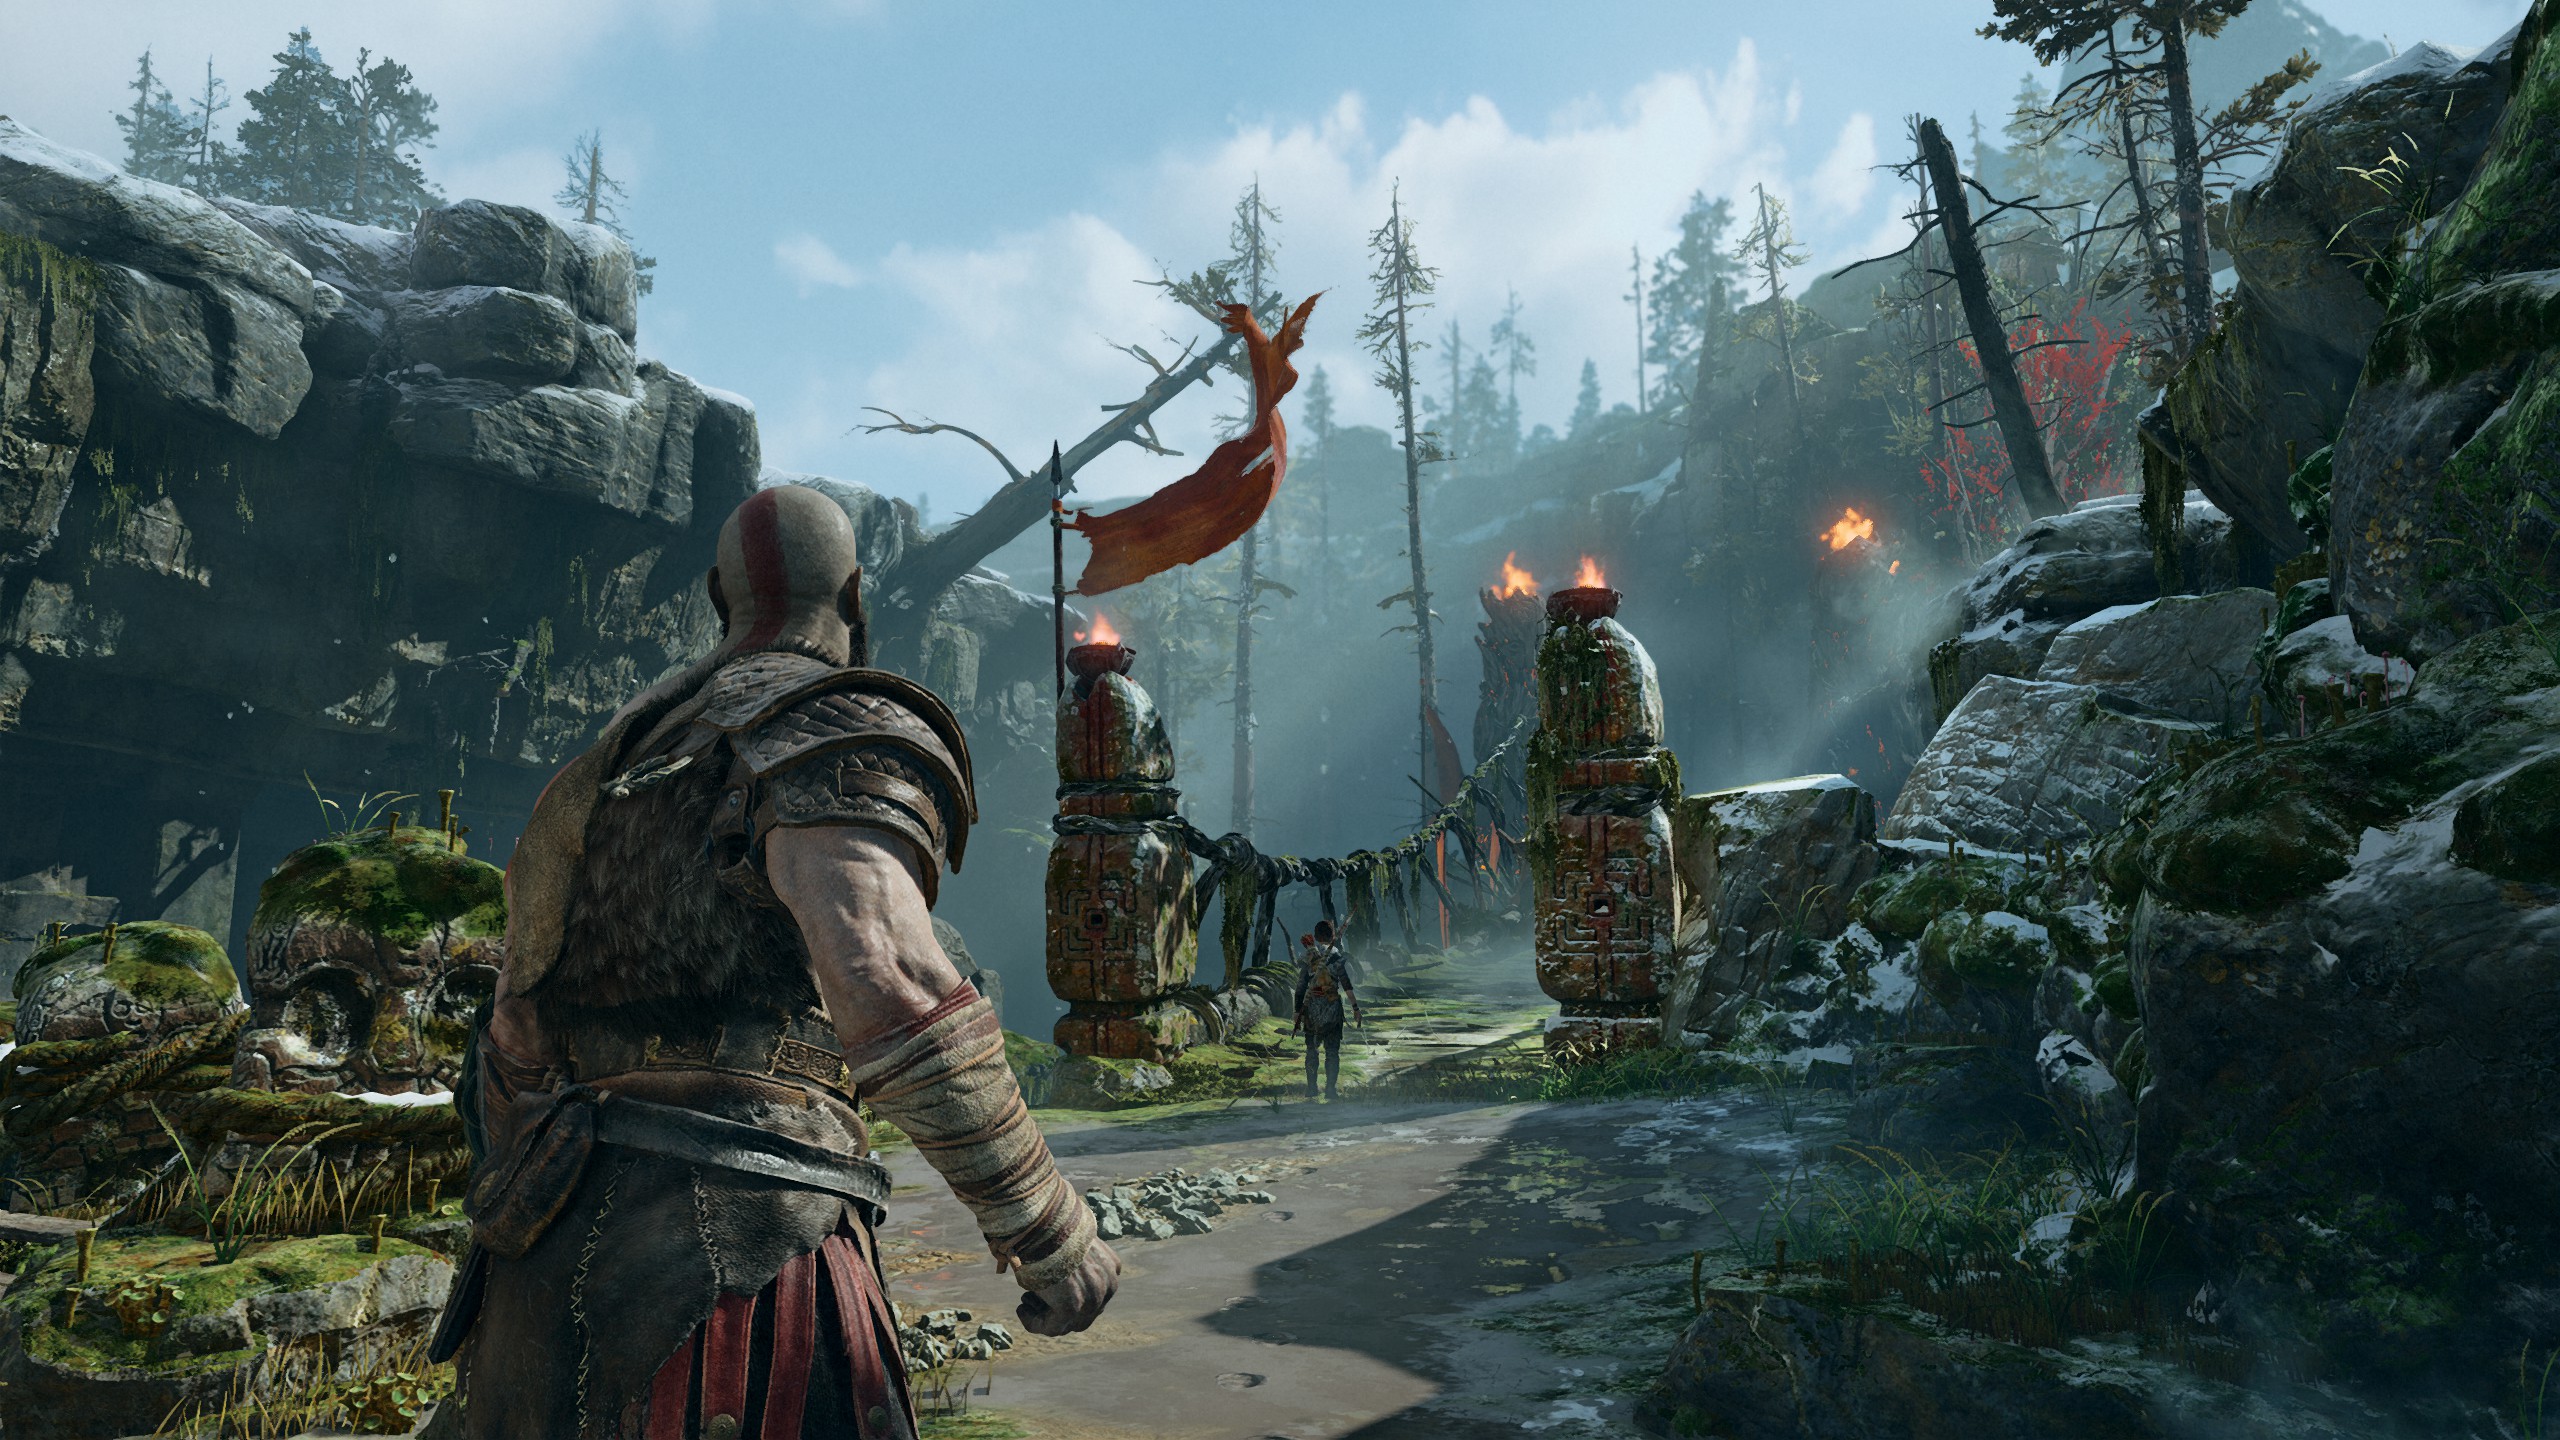 God of War PC performance: The best settings for high FPS